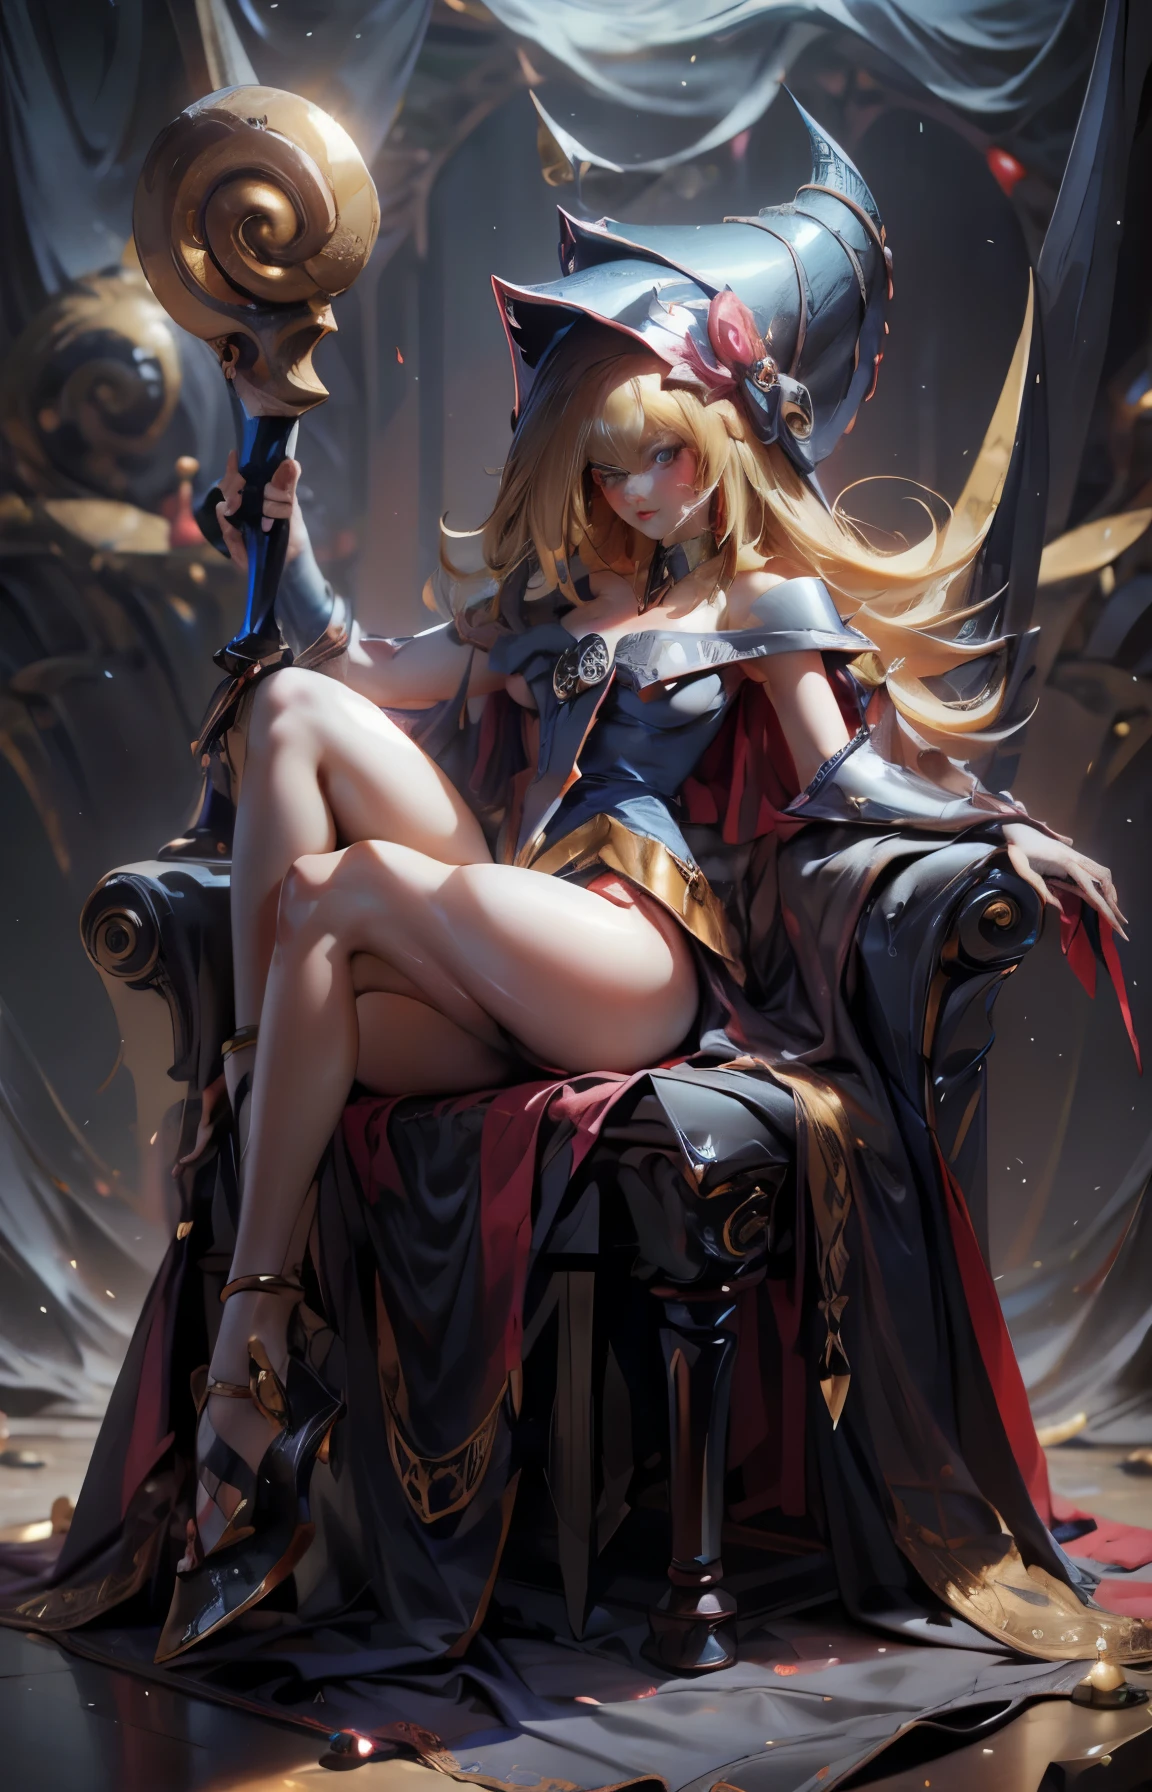 Dark magician gils with black gala dress. She wears red heels, has earrings. Wear necklaces.  Long blonde hair. blue eyes. Red lips. Sensual and subjective pose. She is sitting on a golden throne.